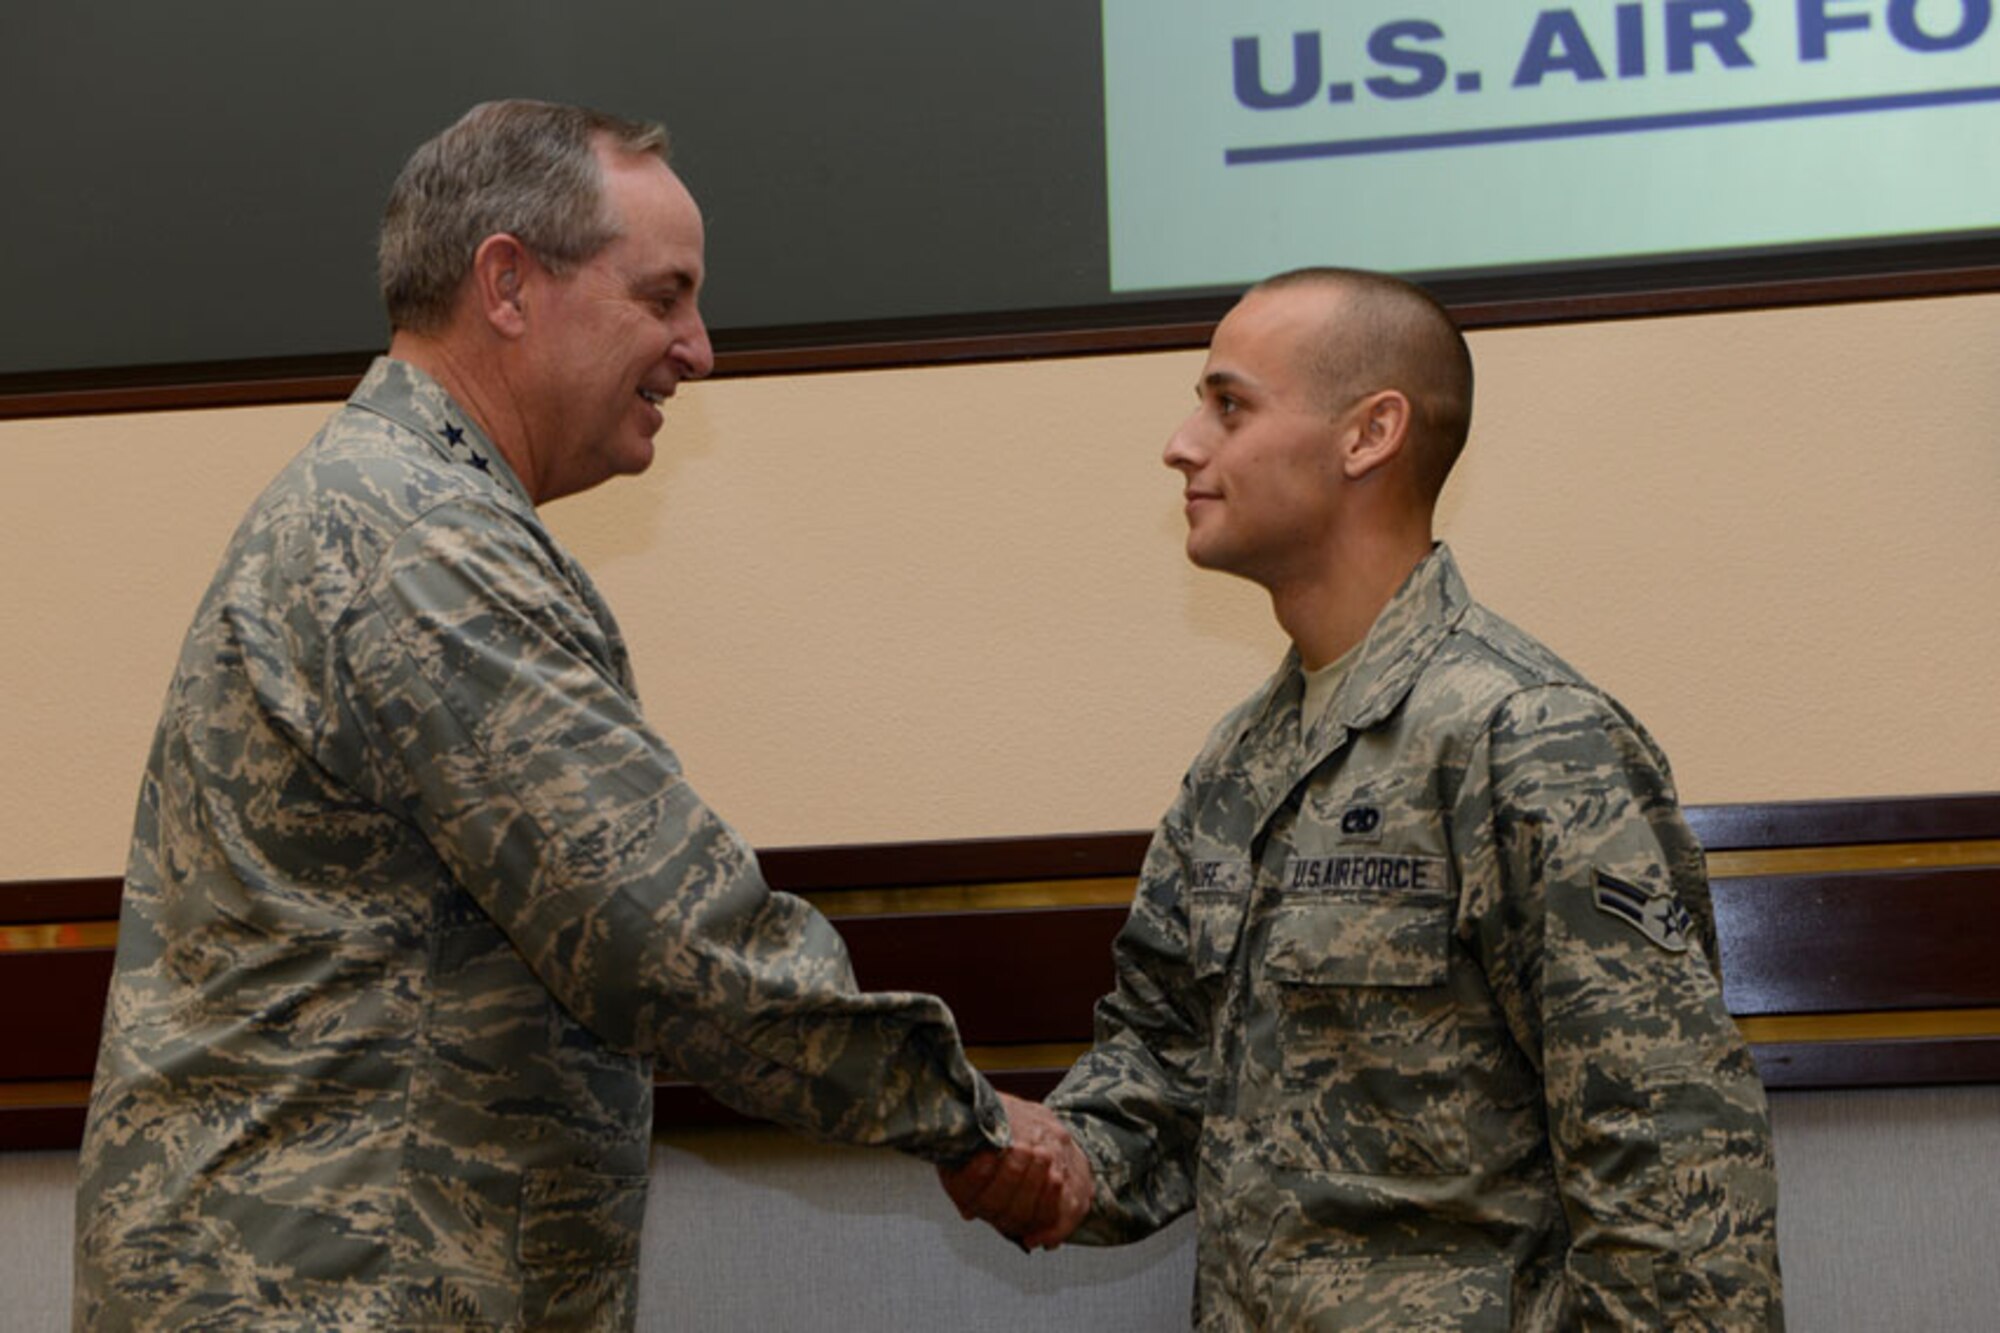 Air Force Chief of Staff, Gen. Mark A. Welsh III recognizes Airman 1st Class Robert Ruff as an outstanding performer Aug. 29, 2013 at Joint Base Elmendorf-Richardson. Ruff is an assistant dedicated crew chief with the 3rd Aircraft Maintenance Squadron. (U.S. Air Force photo/Airman First Class Omari Bernard) 